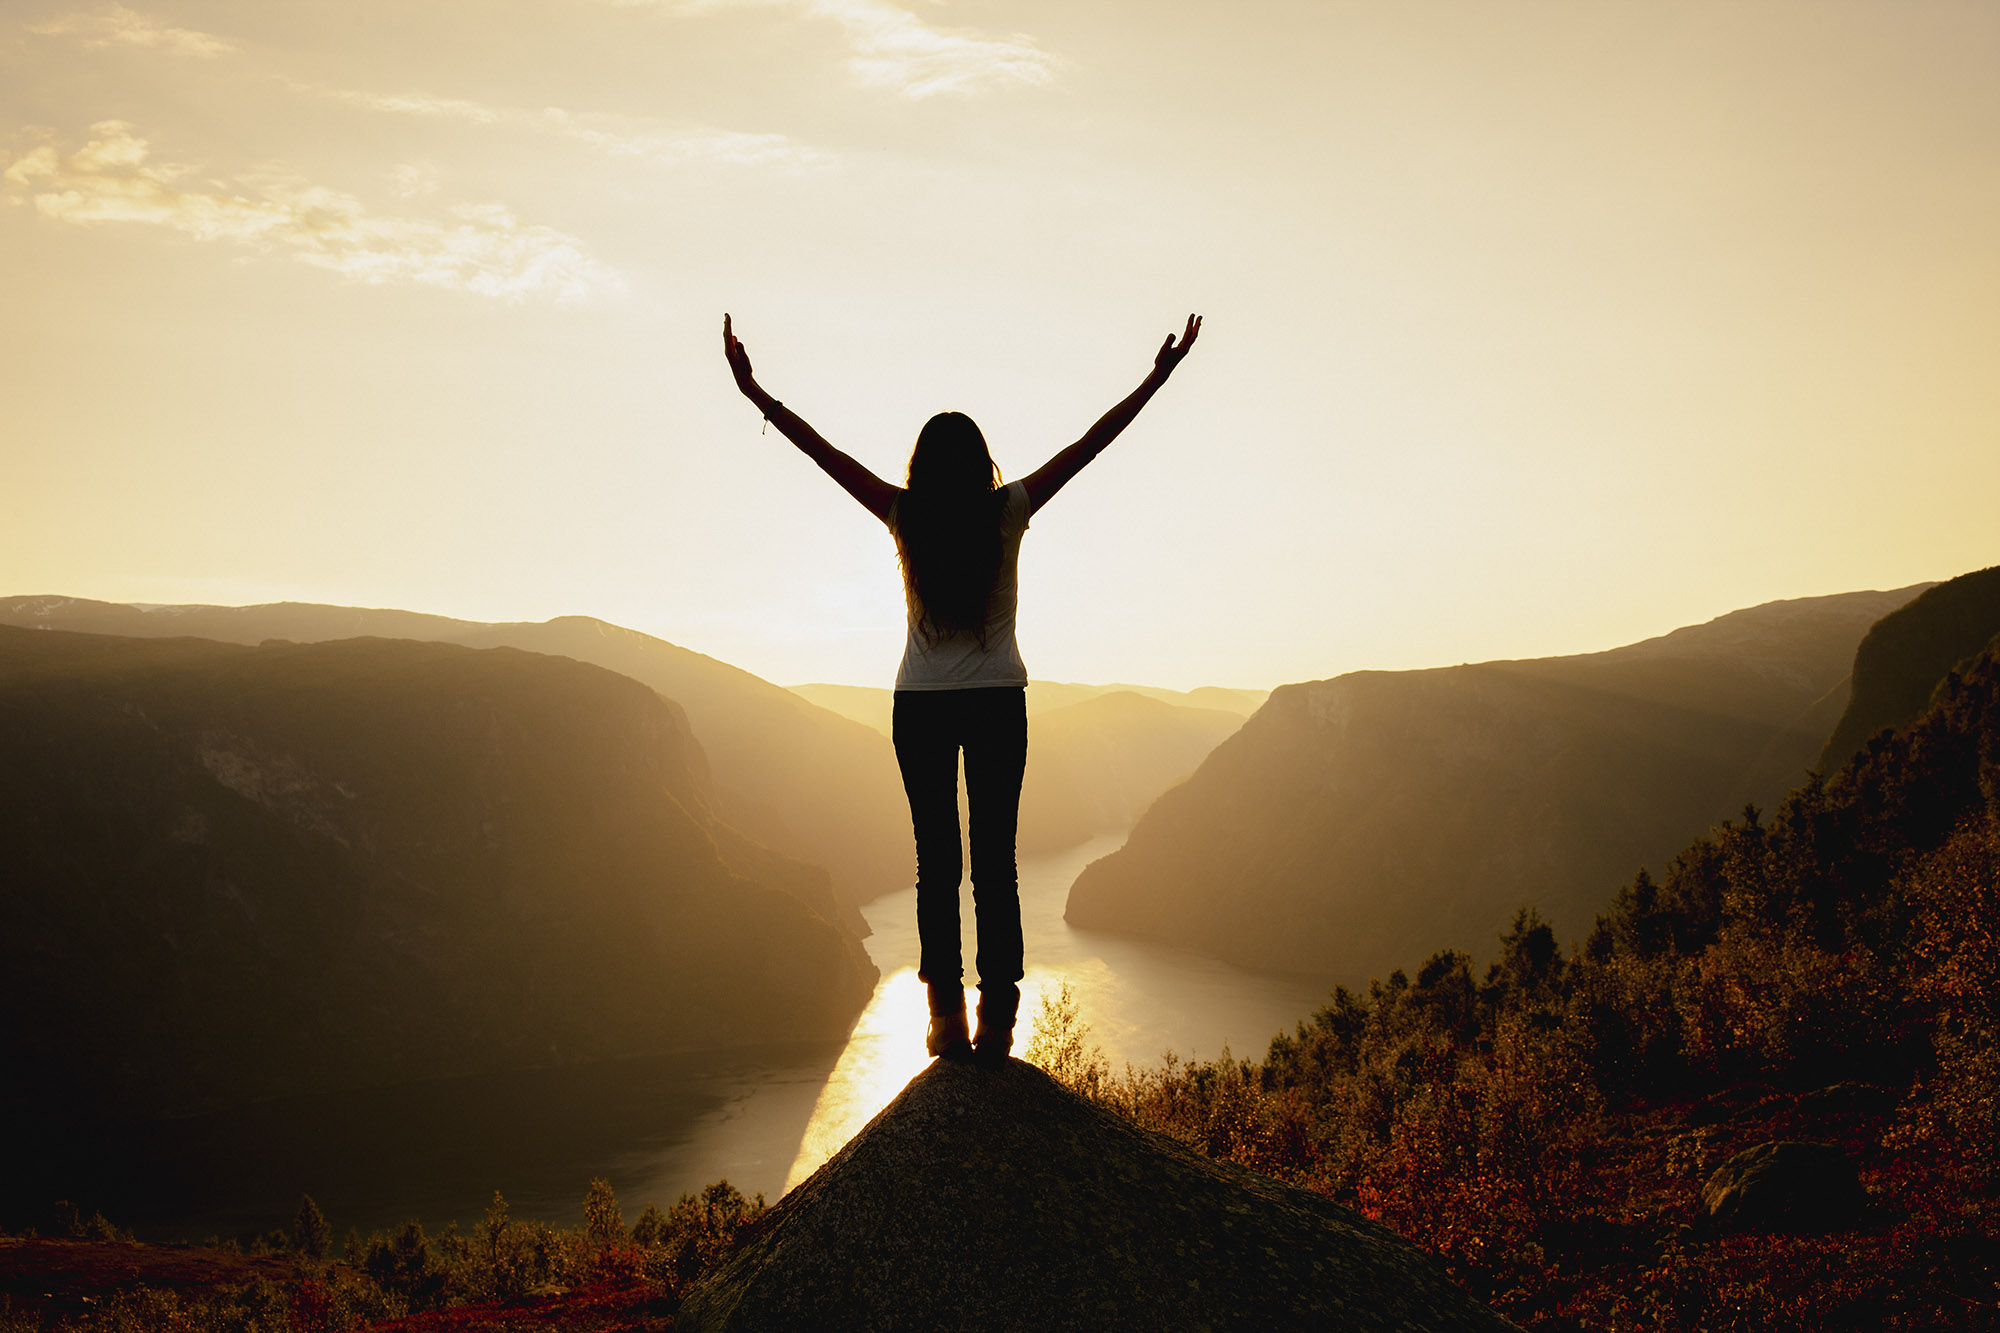 Woman standing on the edge of a mountain with arms raised over looking a river